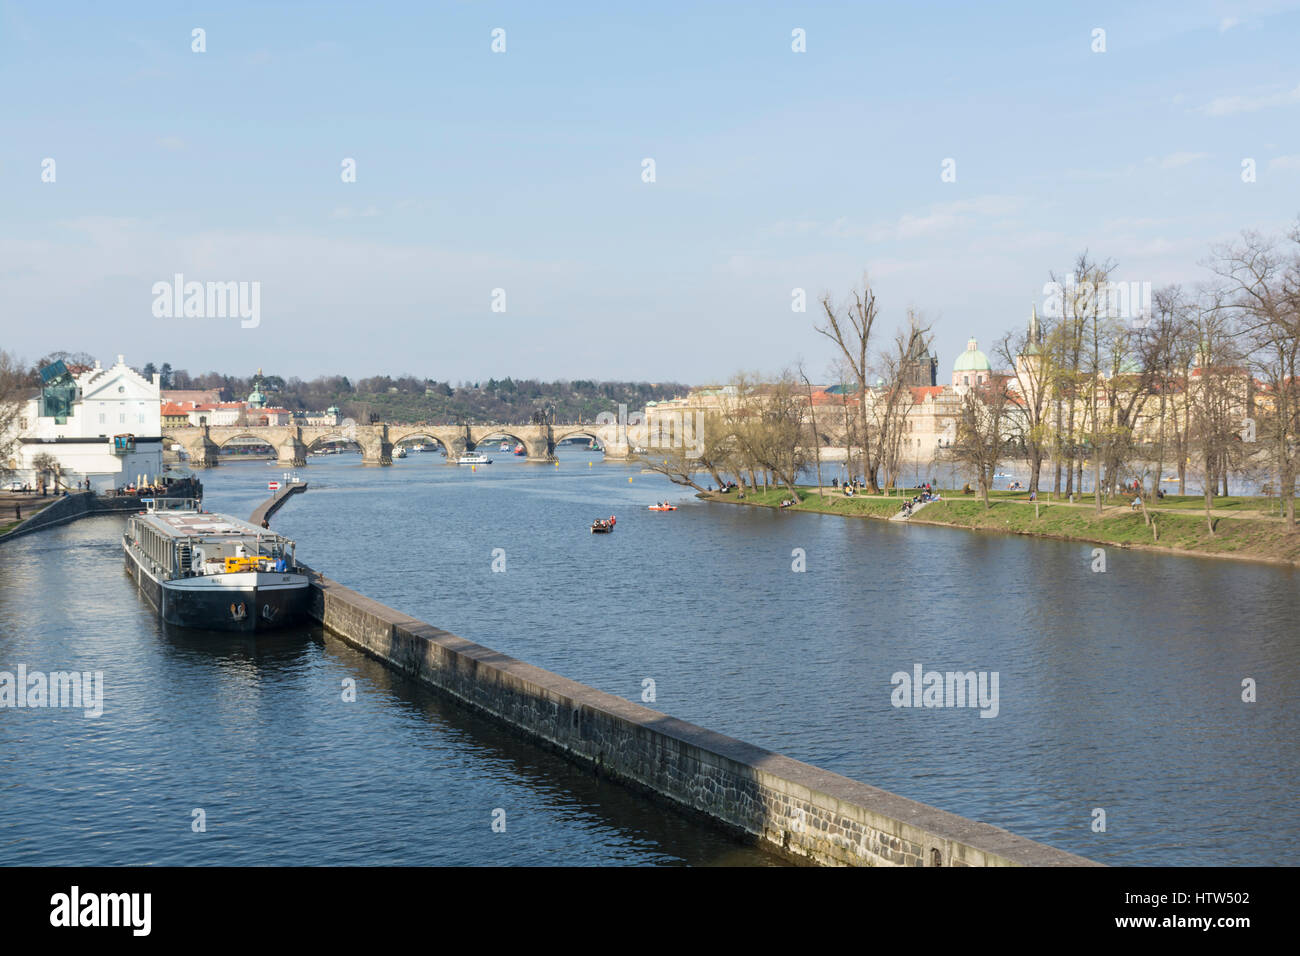 Cruise boat on the Vltava river looking towards the Charles Bridge in Prague, Czech Republic Stock Photo